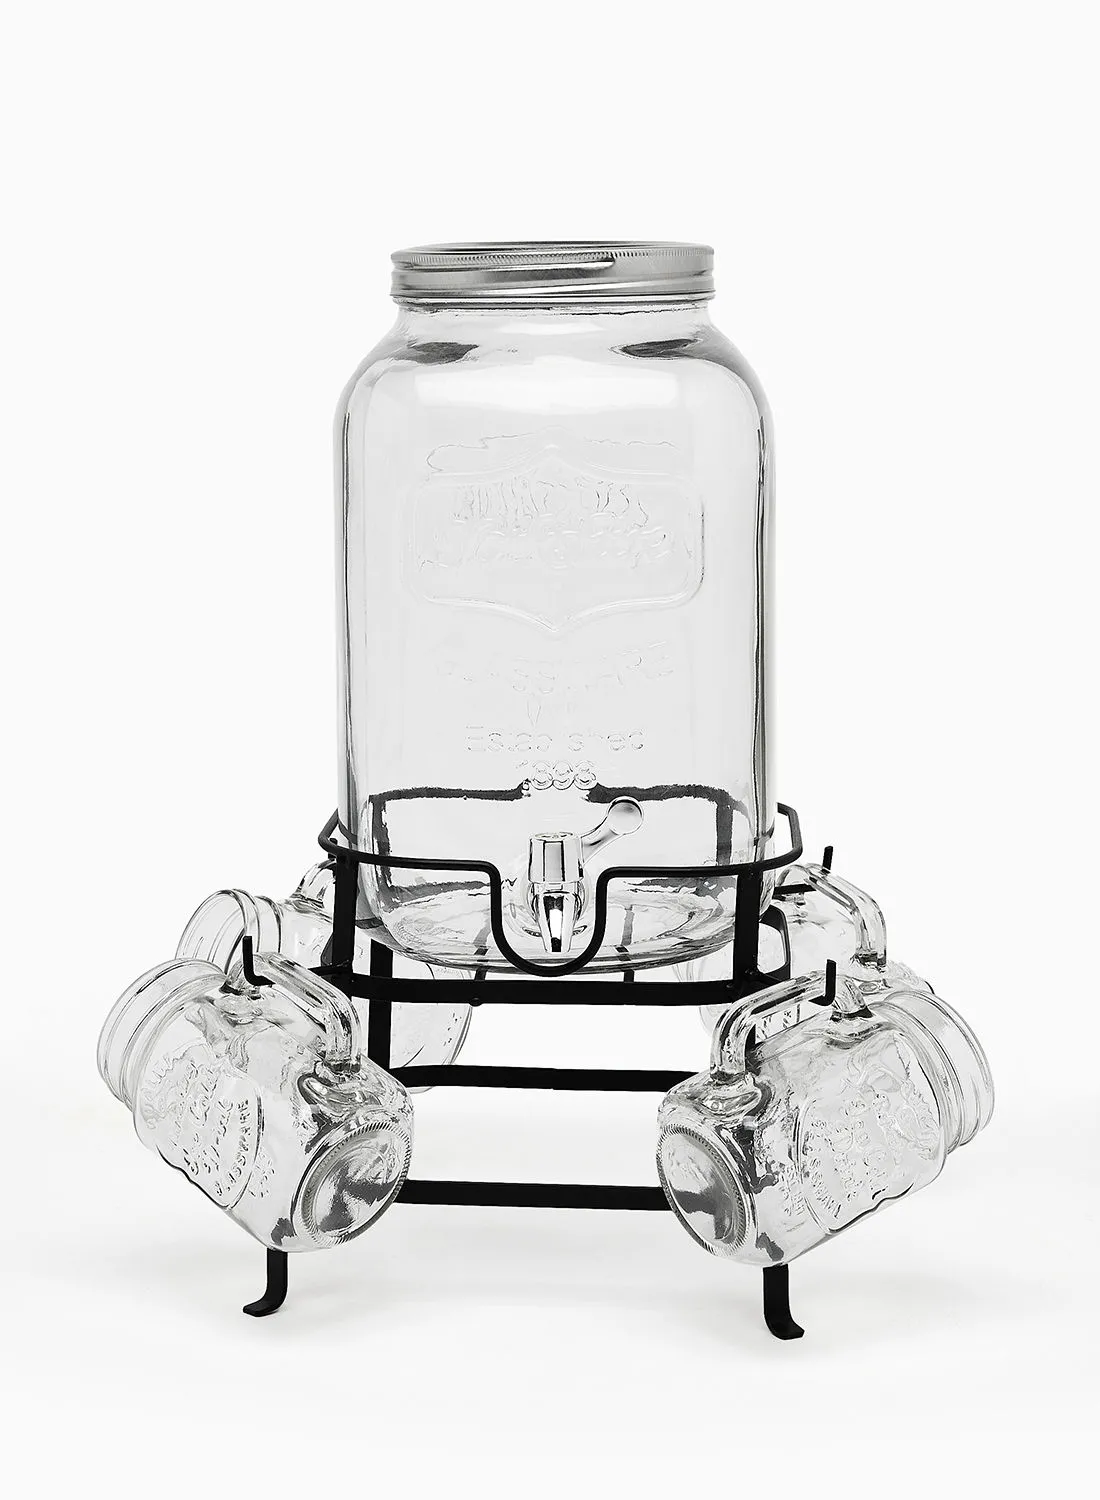 noon east Glass Beverage Dispenser Set - 8L Beverage Dispenser + 4 Mason Jars - Beverage Glasses With Lid And Straw For Juices Glass By Noon East - Beverage Dispenser, Mason Jars - Serves 4 - Clear